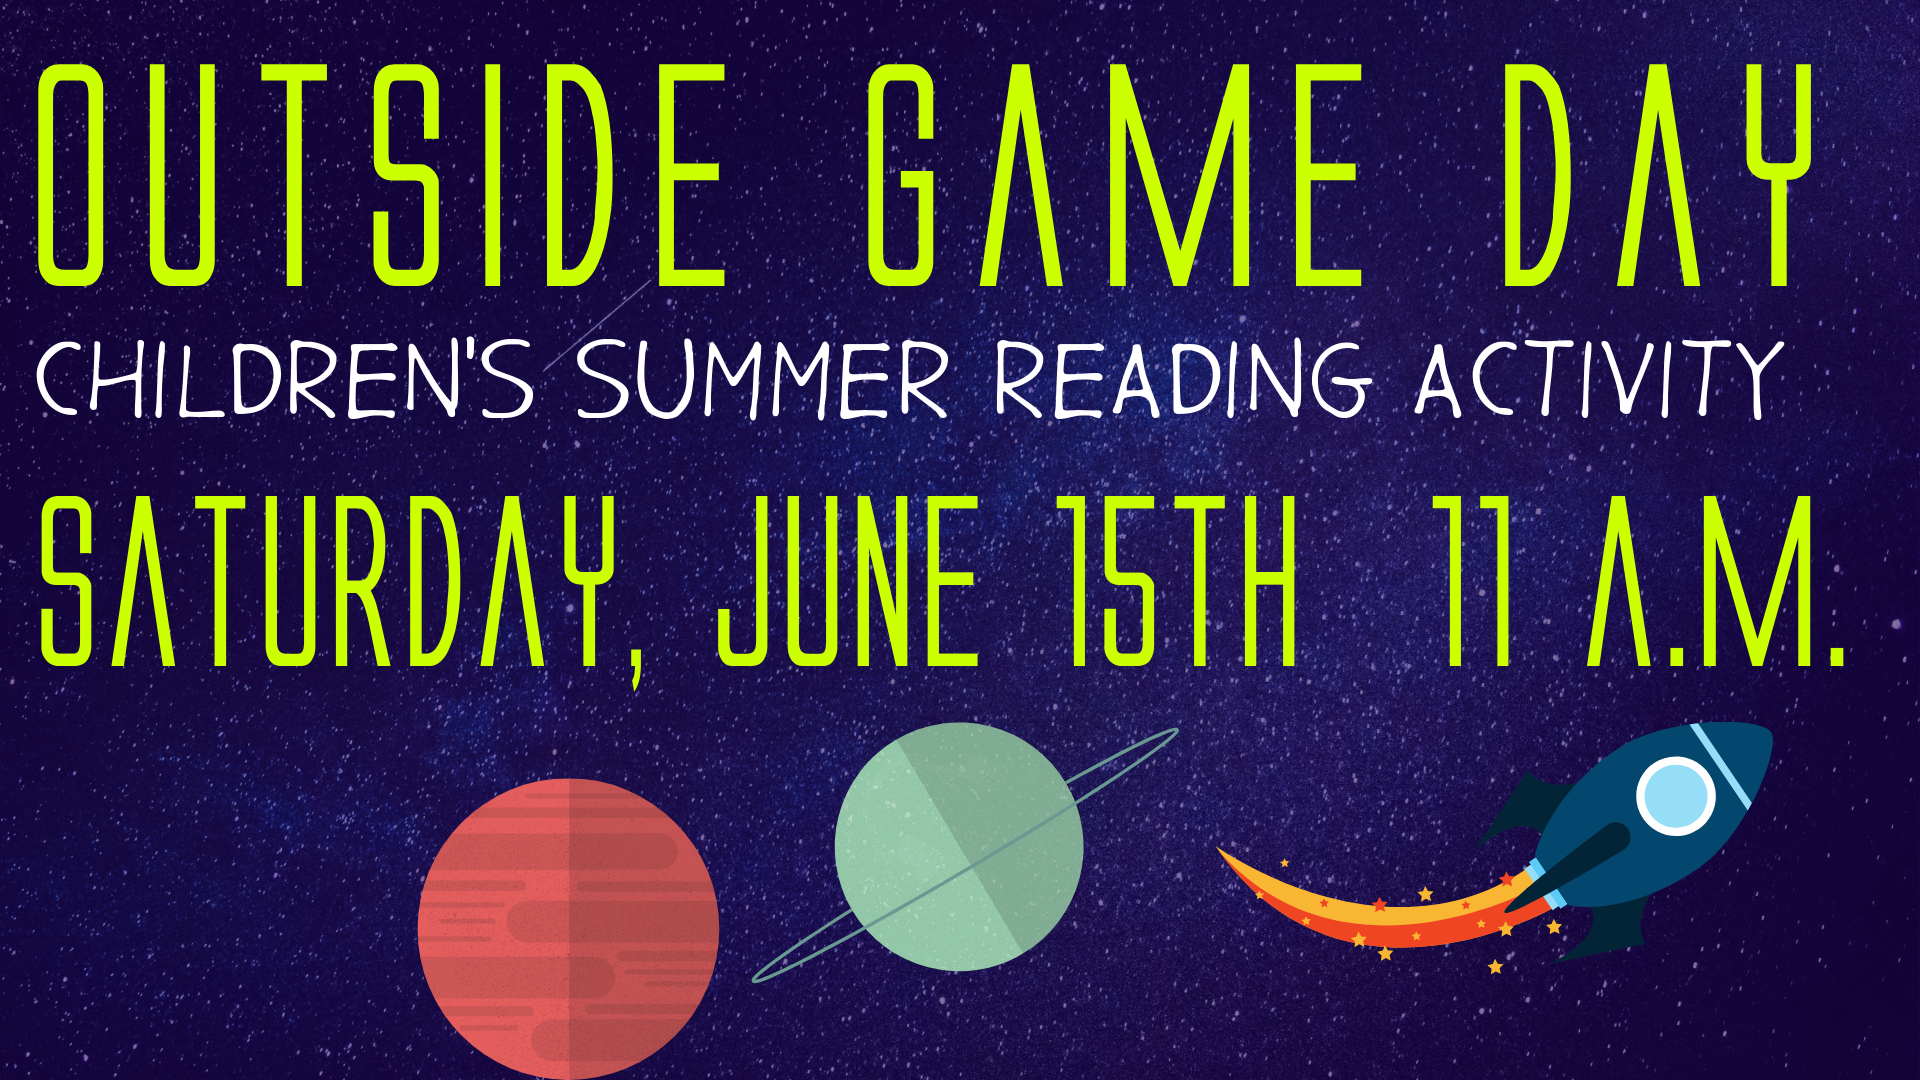 Space Games in the Library Garden